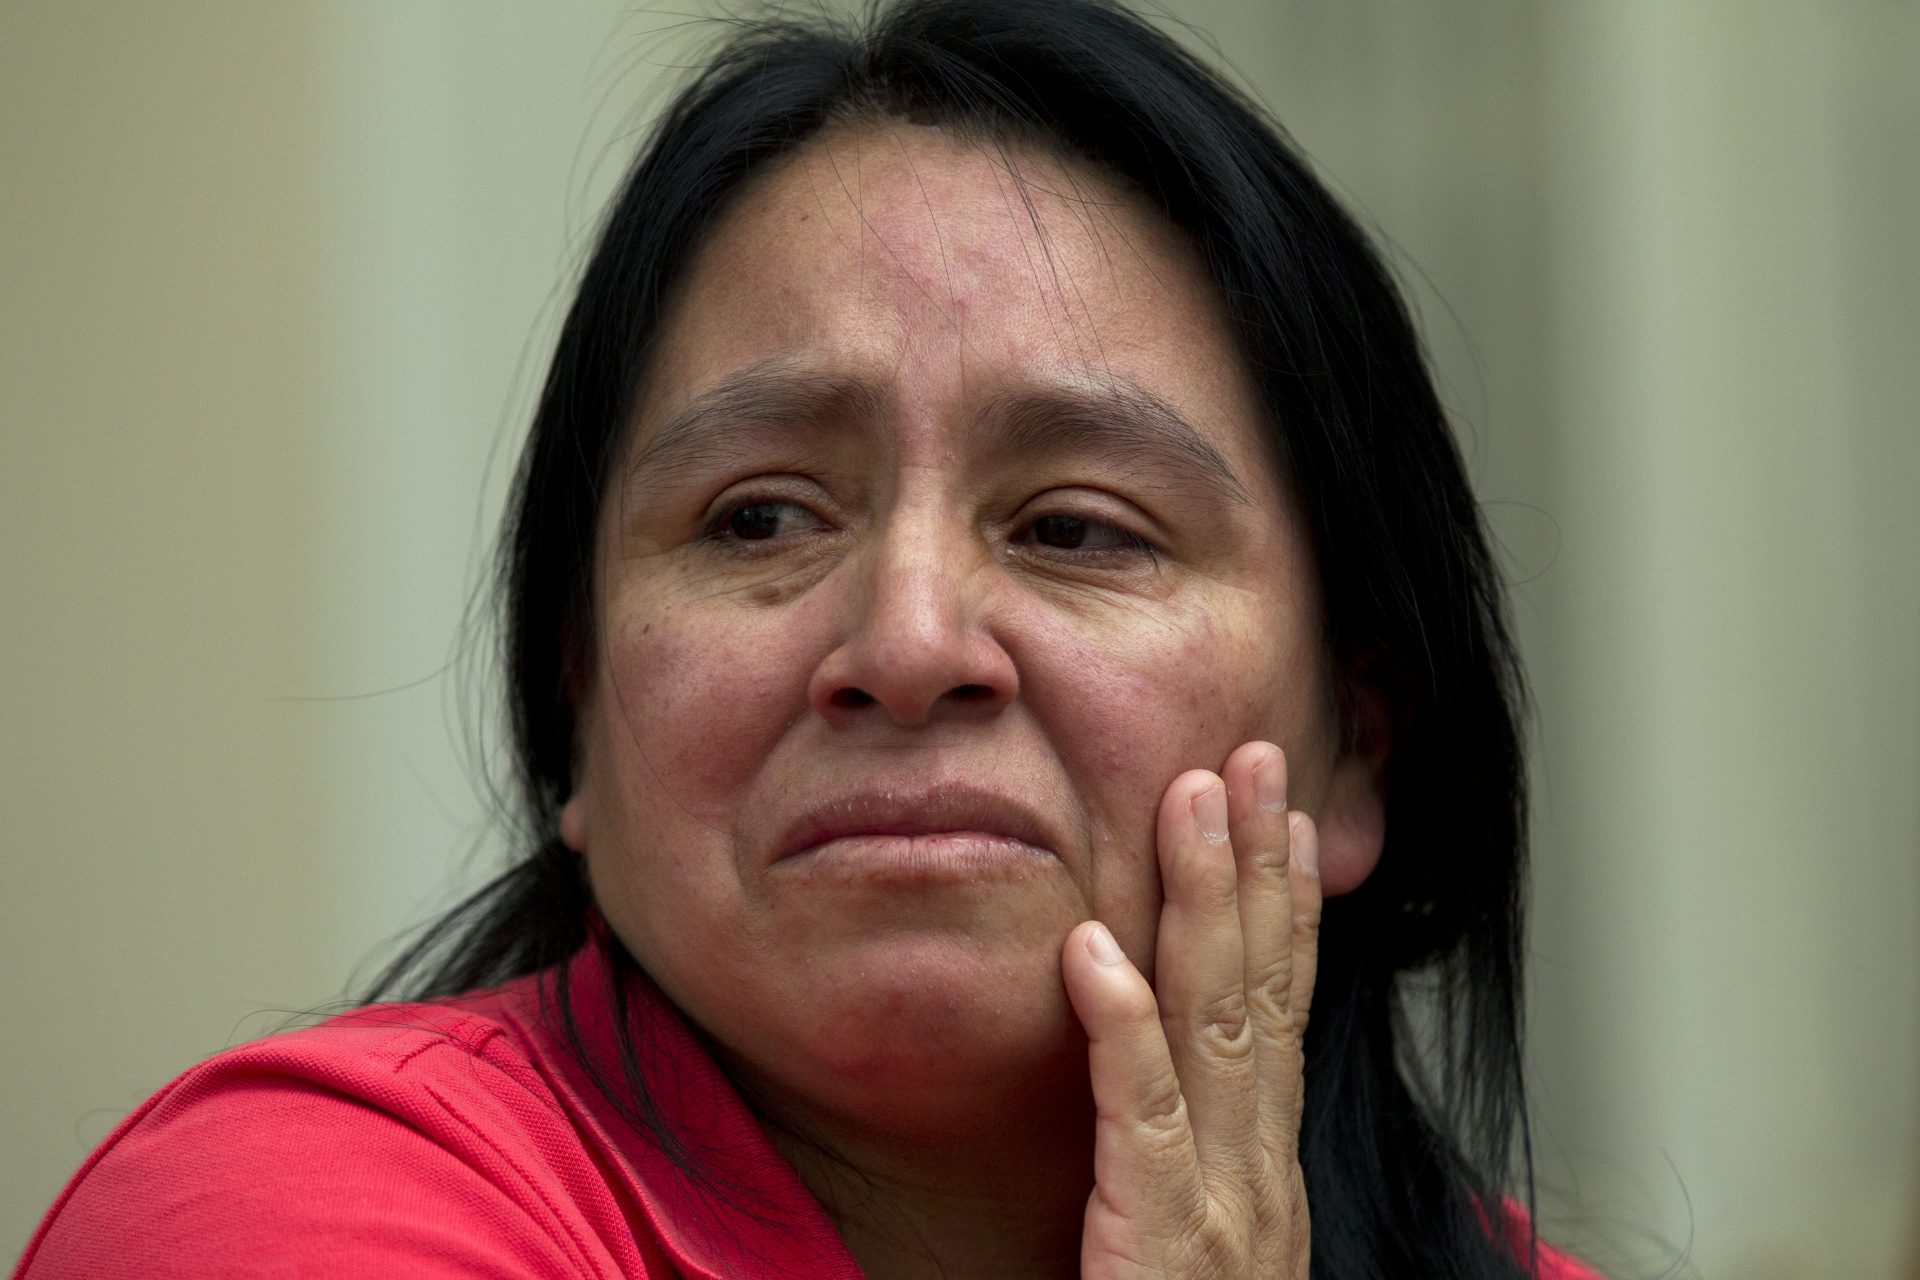 FILE PHOTO: In a Wednesday, July 17, 2019 file photo, Maria Chavalan-Sut of Guatemala, one of a number of immigrants taking sanctuary at houses of worship, speaks during an interview at the Wesley Memorial United Methodist Church in Charlottesville, Va.